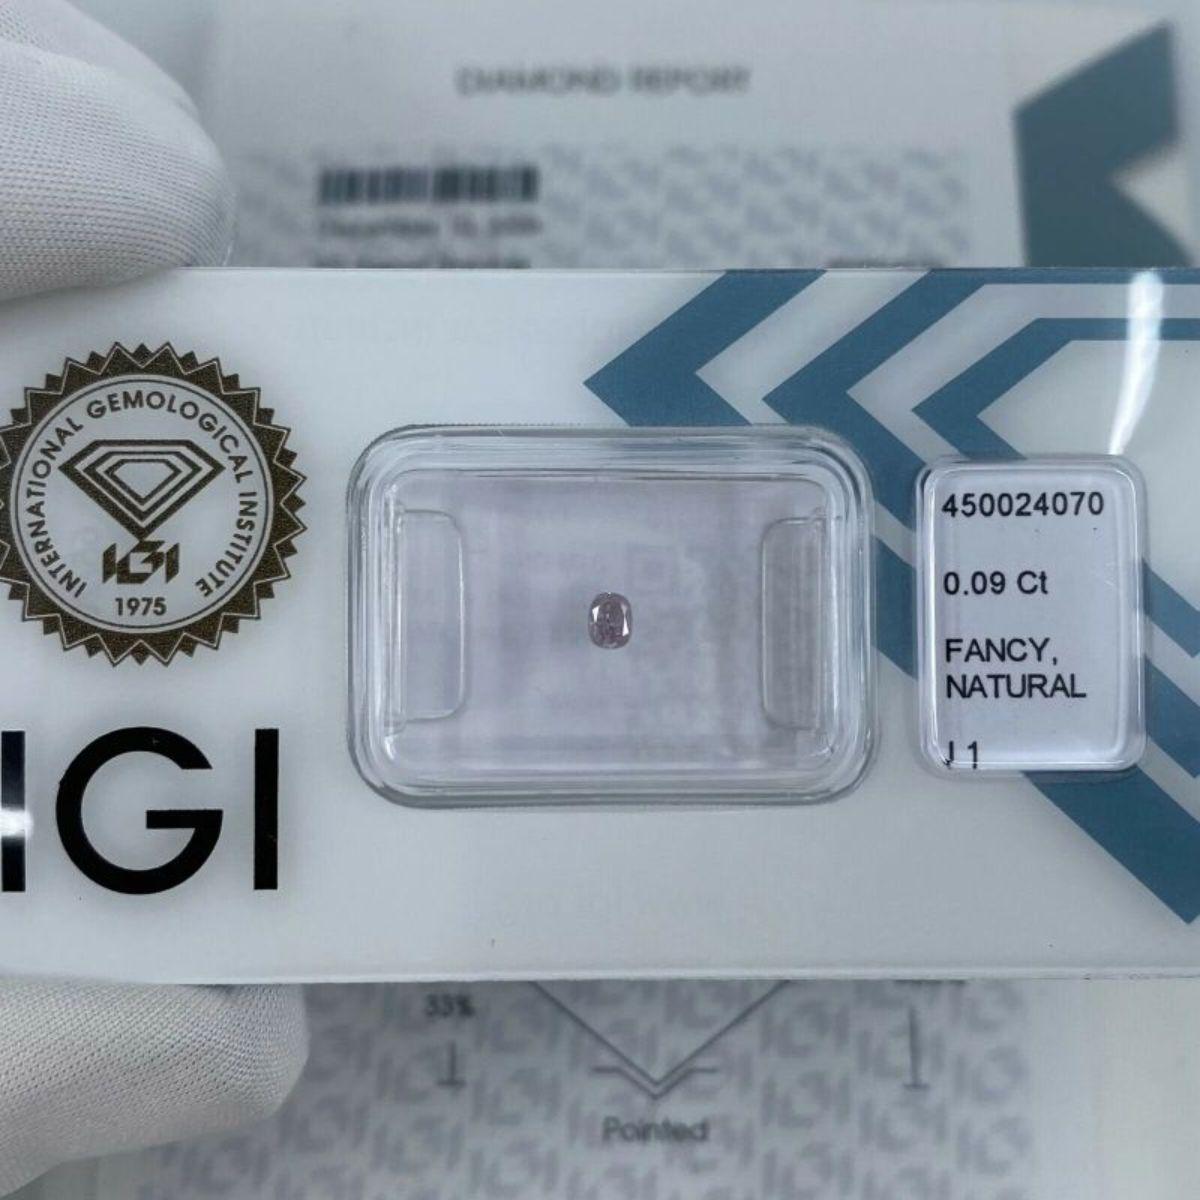 Untreated Fancy Pink Diamond IGI Certified 0.09ct Sealed Blister I1 Cushion Cut

Certified Fancy Pink Diamond Sealed In IGI Seal.
Natural untreated pink diamond with a rare fancy light pink colour. 0.09 carat. With I1 clarity.
Fully certified by IGI